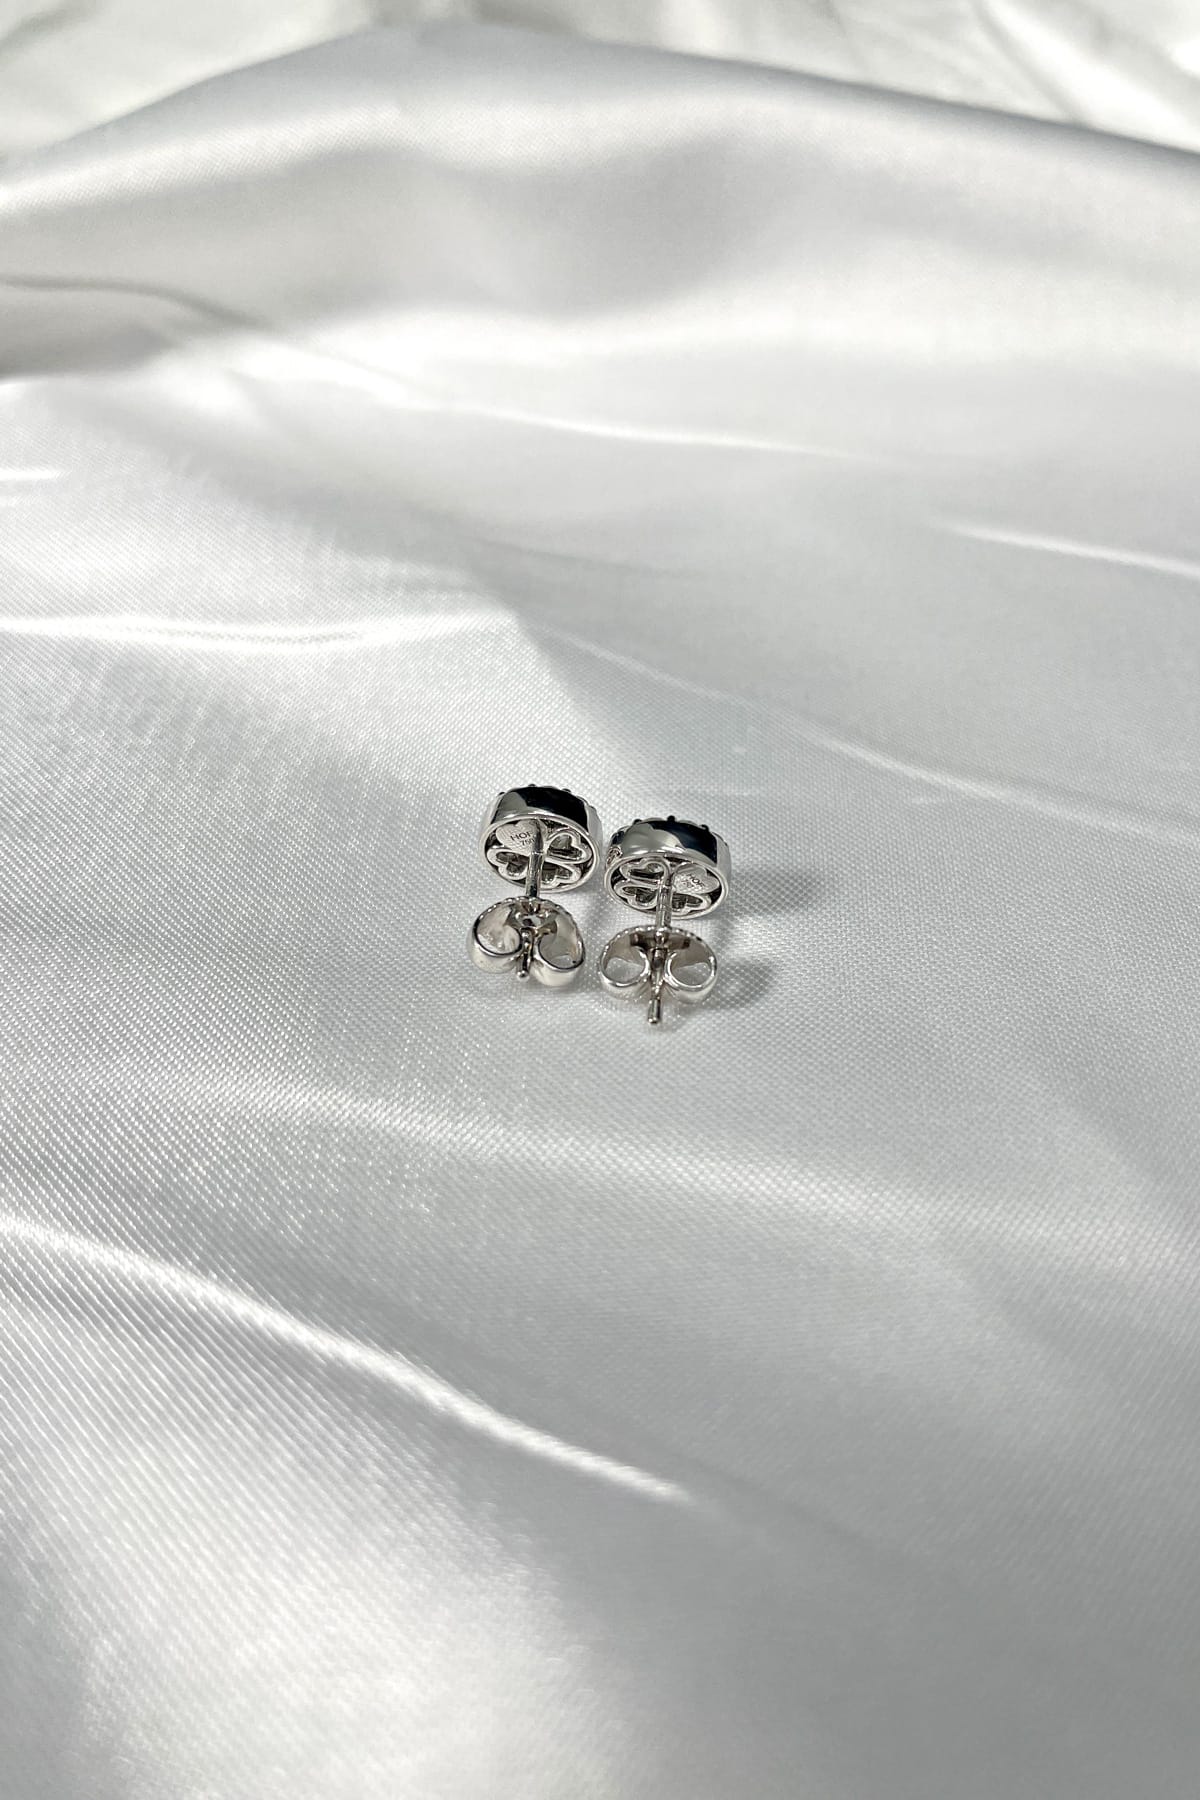 18 Carat White Gold Fulfillment Diamond Stud Earrings From Hearts On Fire available at LeGassick Diamonds and Jewellery Gold Coast, Australia.